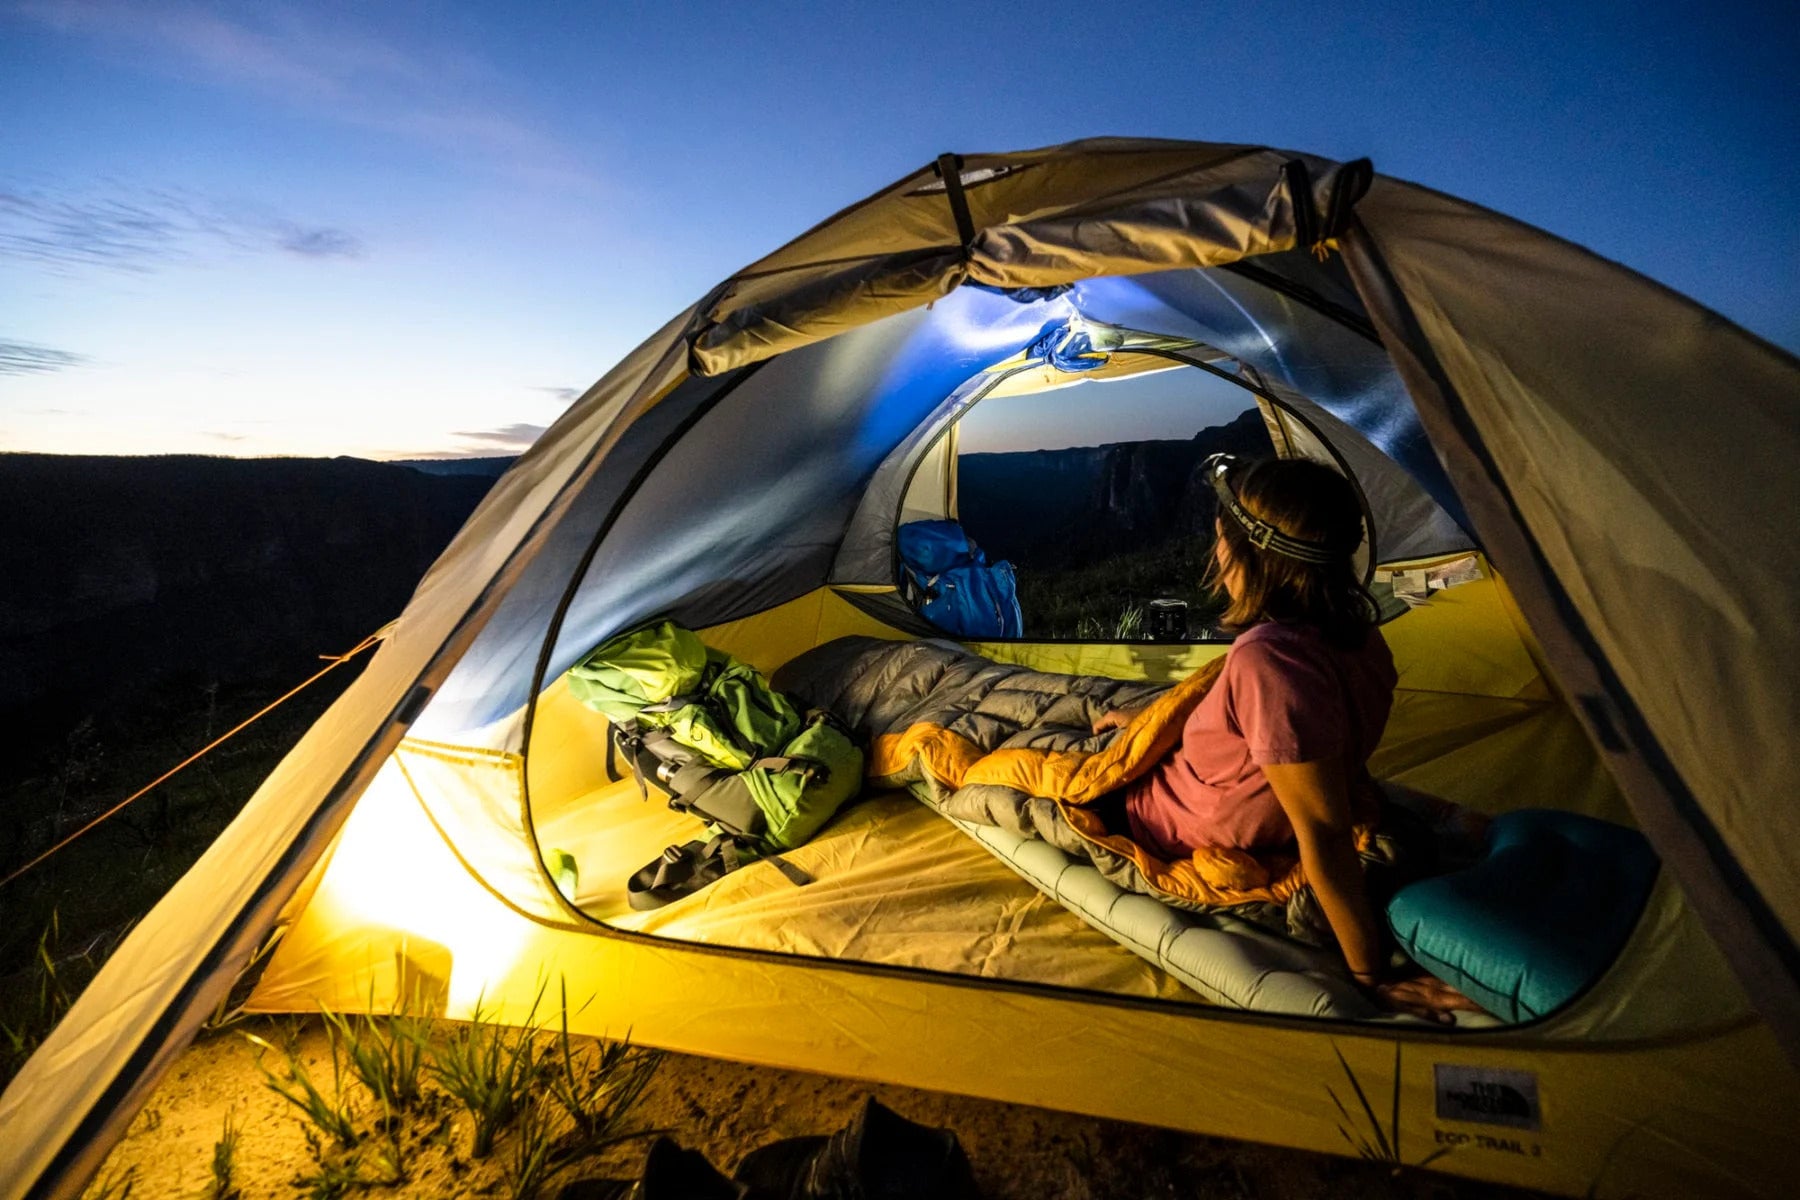 Connect with Nature: A Night Sleeping Outdoors